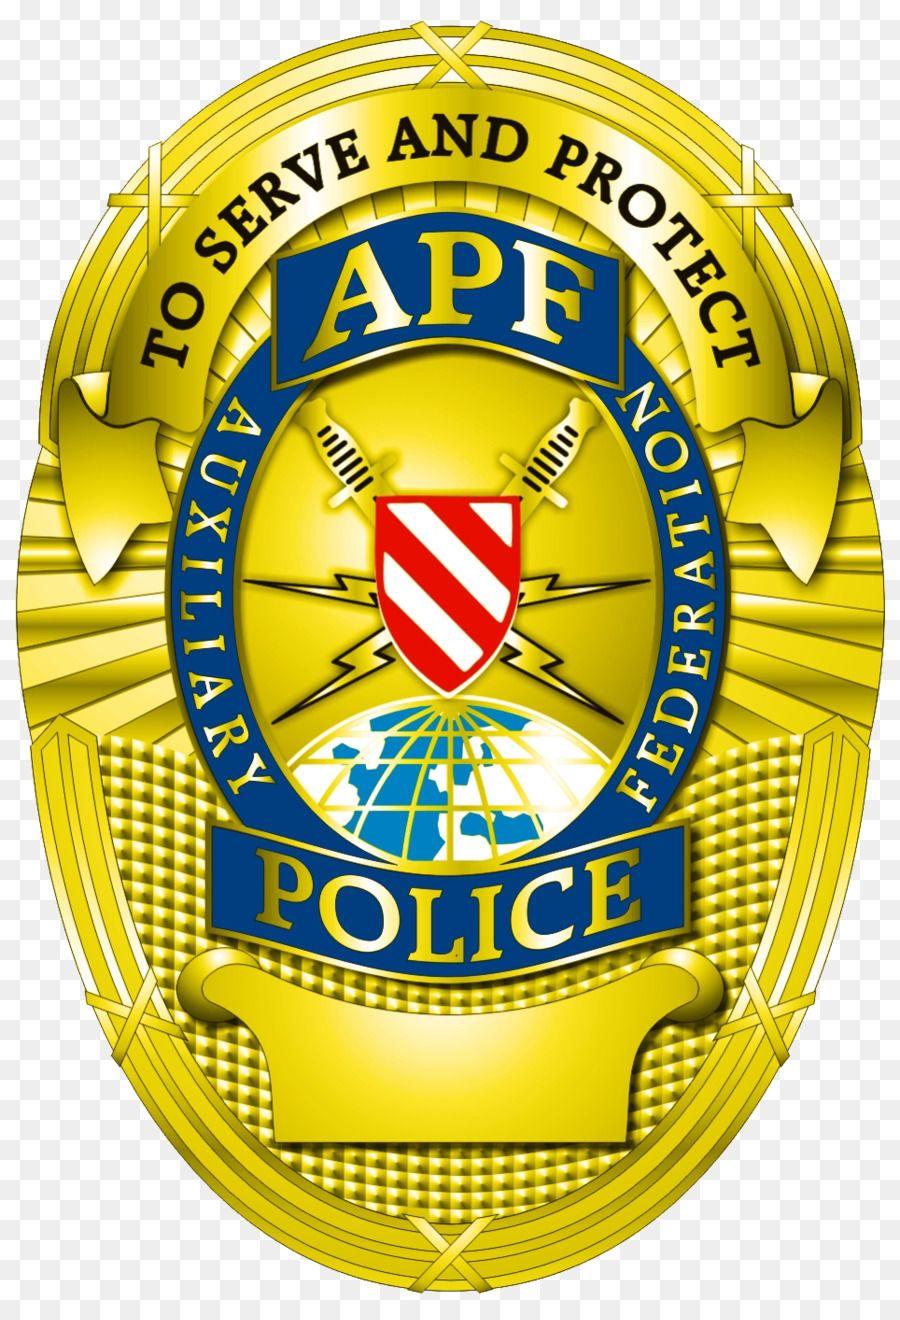 The Police Circle Logo - Badge Auxiliary police Police officer Security - Police png download ...